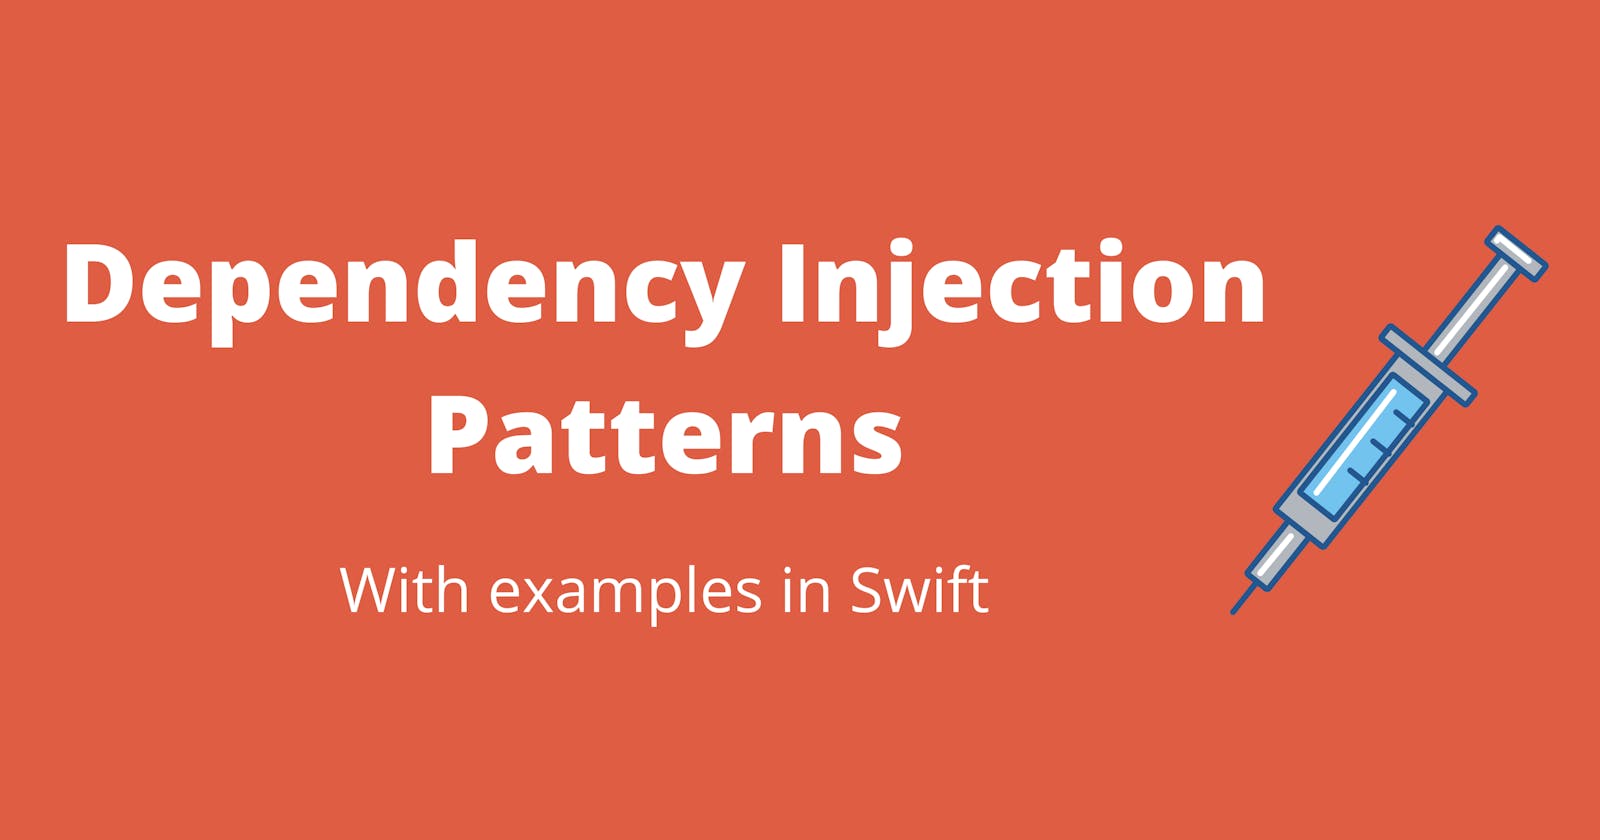 Dependency Injection Patterns